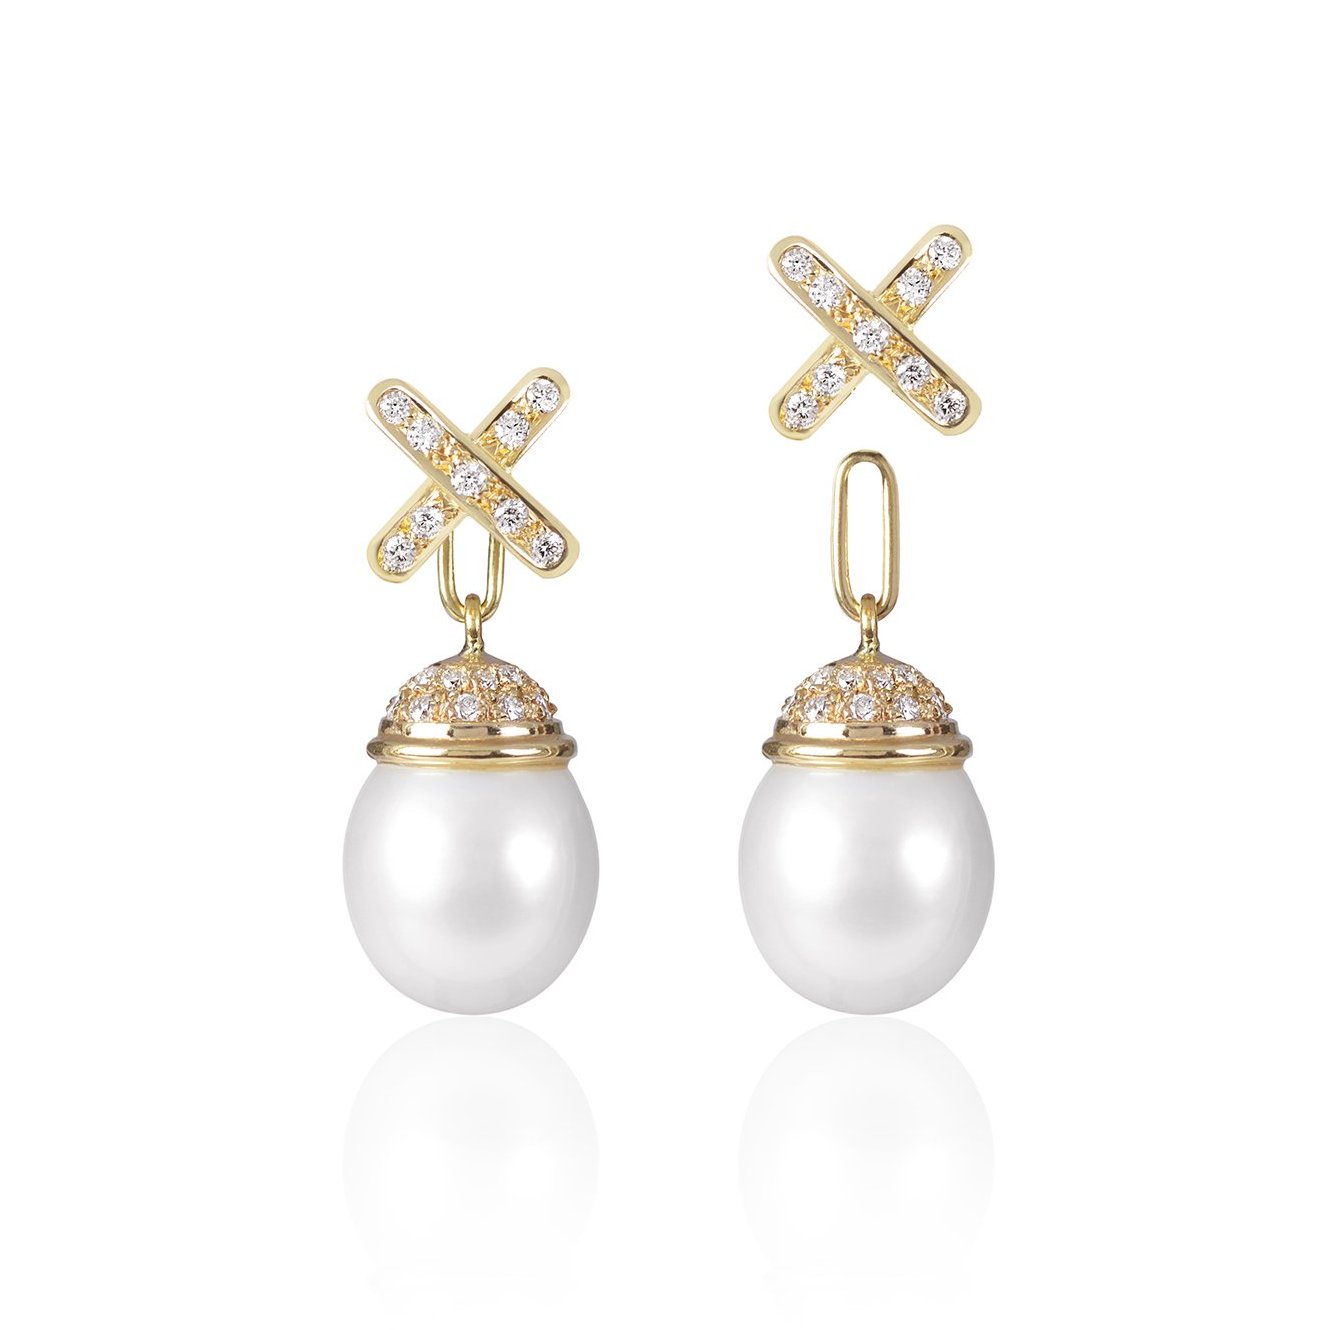 Decadent Cross Pearl Earrings with detachable South Sea and Diamond pendants one detached by McFarlane Fine Jewellery